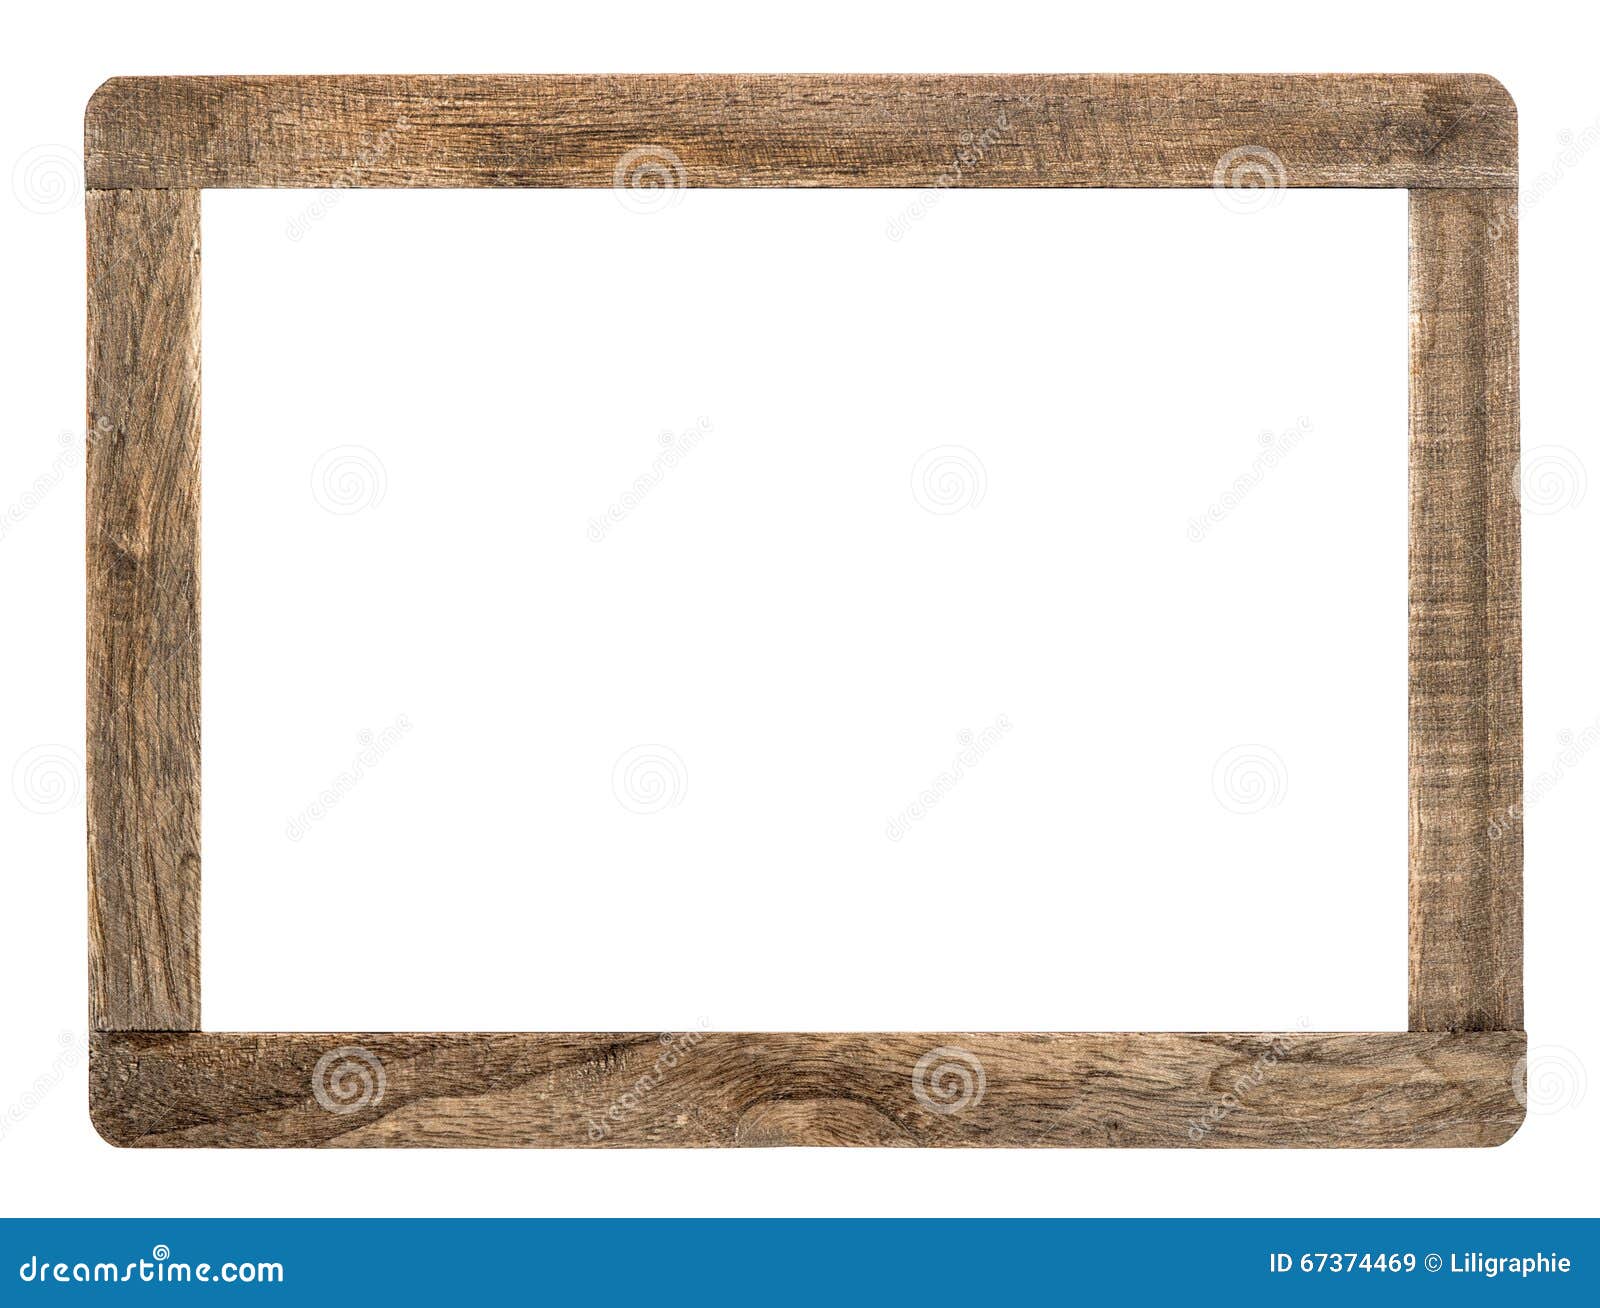 rustic wooden frame  on white